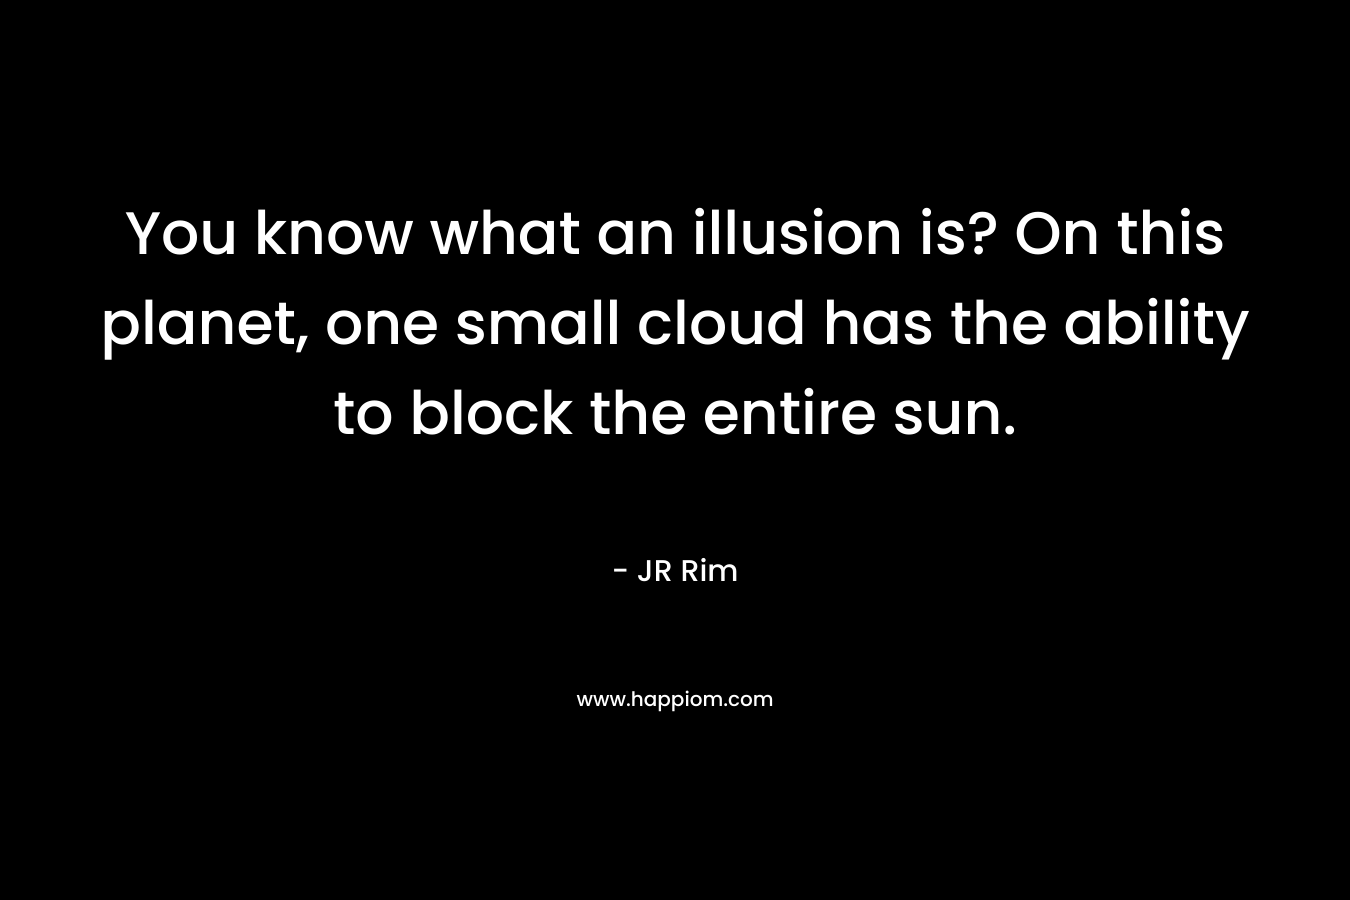 You know what an illusion is? On this planet, one small cloud has the ability to block the entire sun.